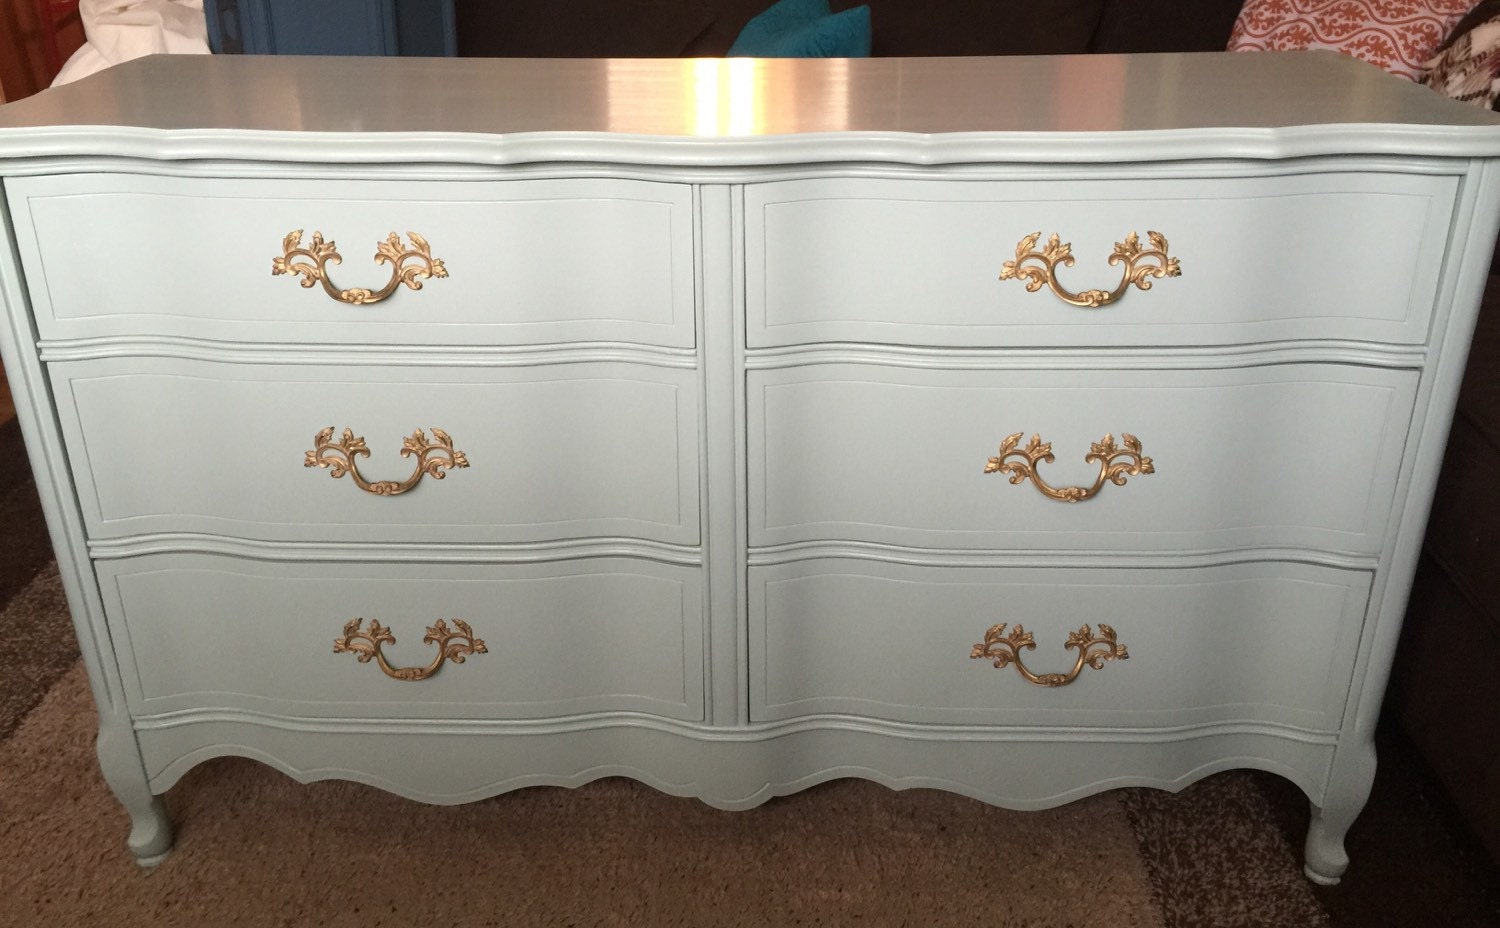 SOLD Vintage Bassett French Provincial 6 Drawer by PassionForFlair